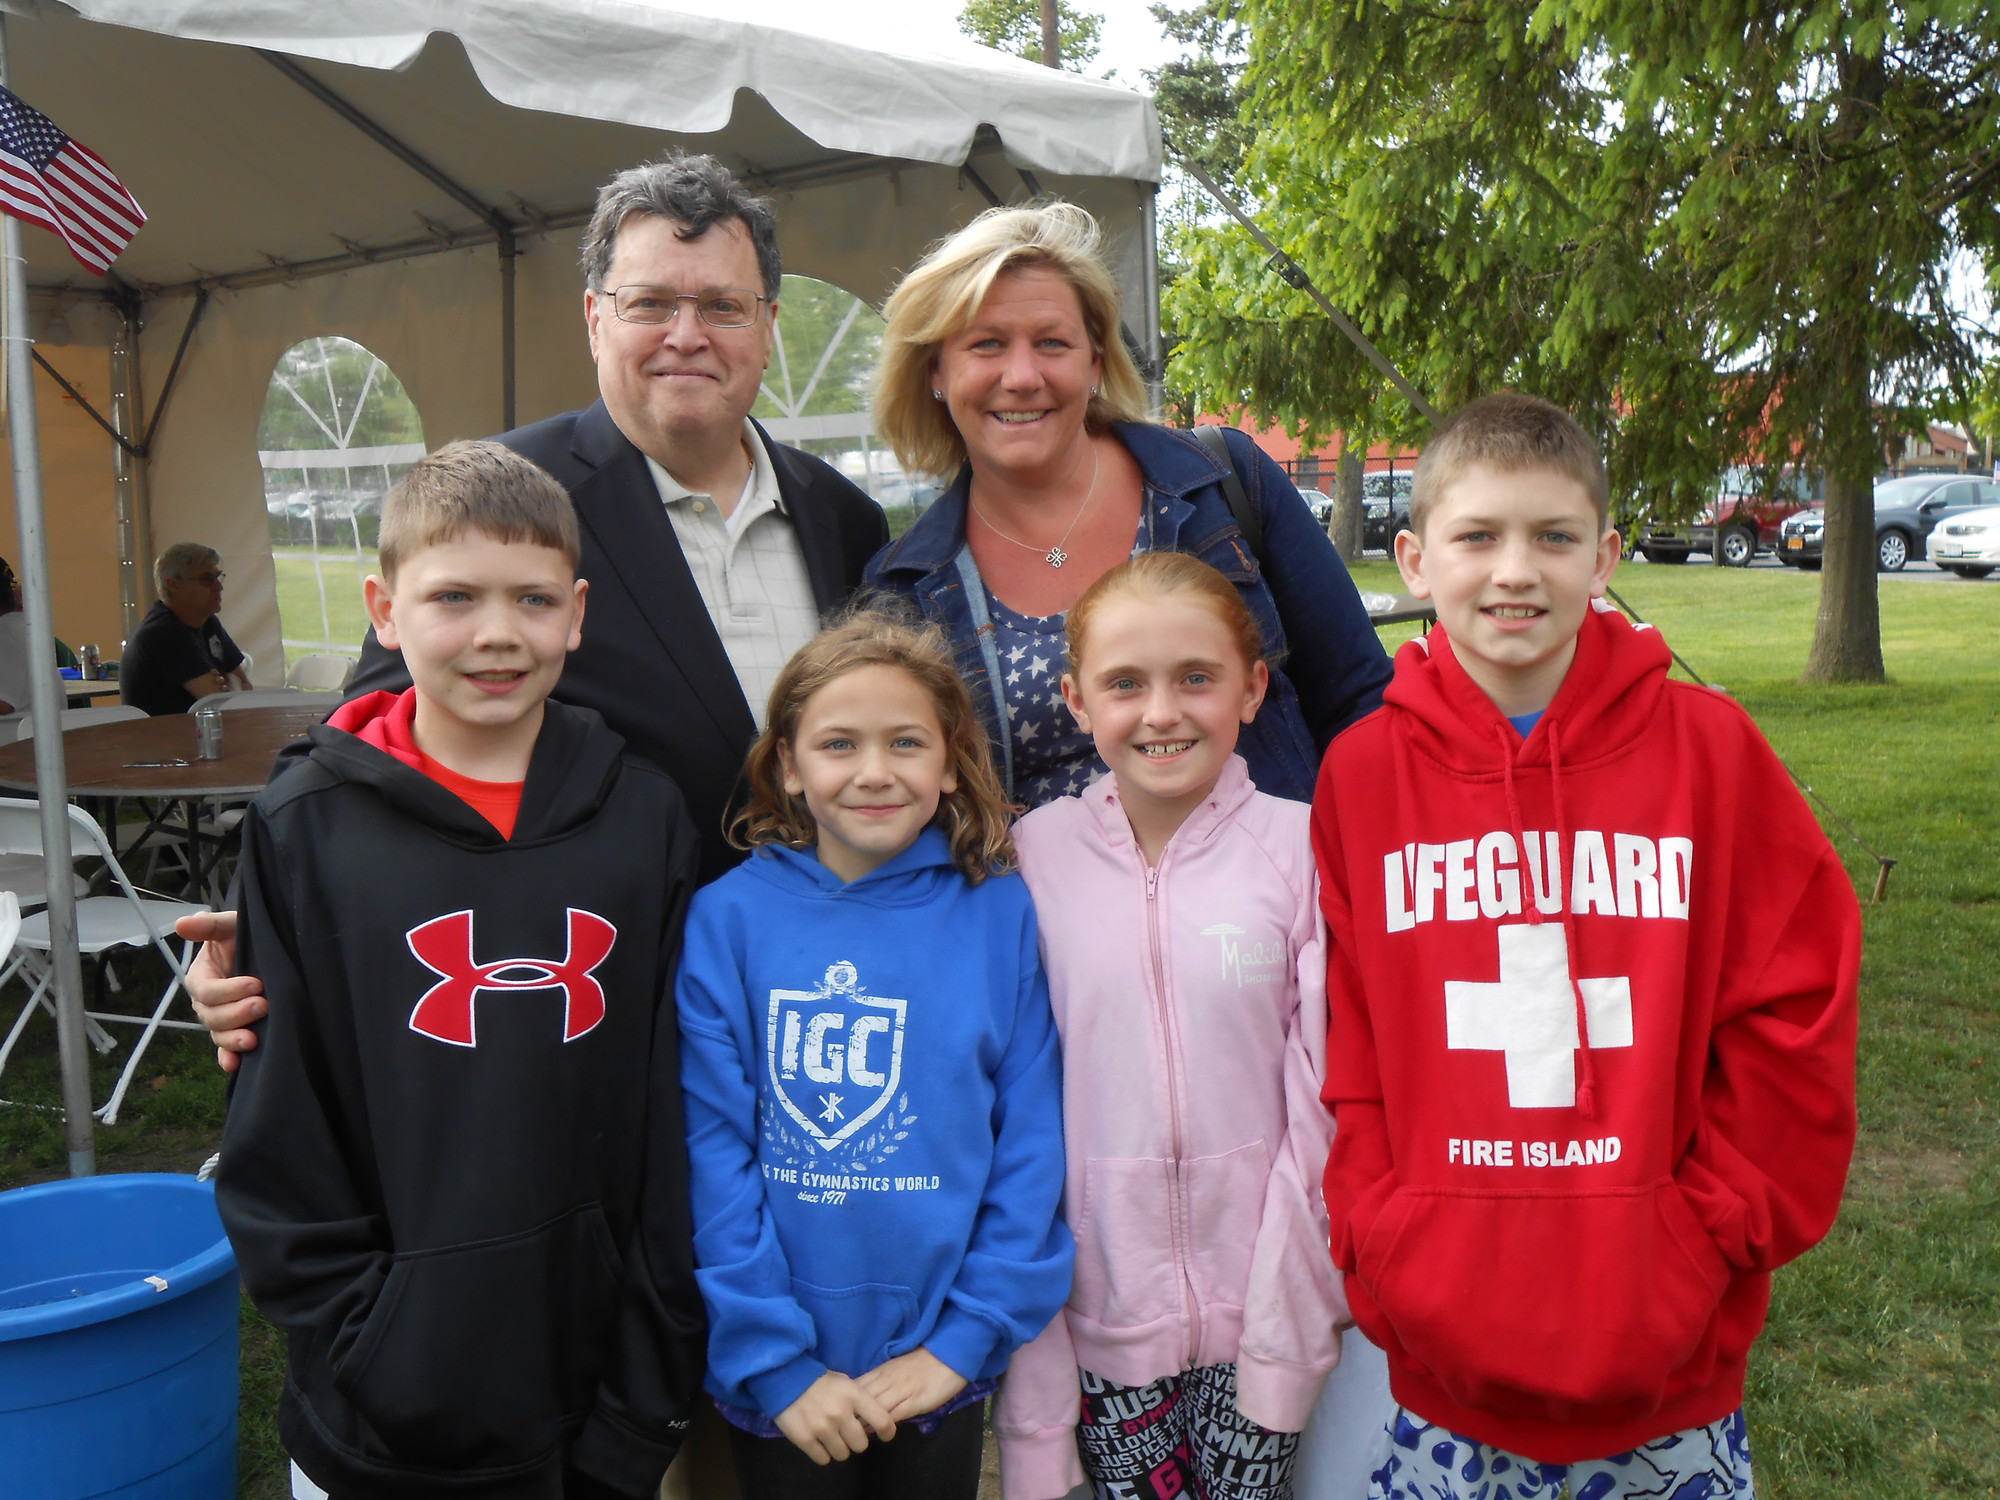 Mayor Bill Hendrick greeted resident Mary Anne Readon. With them, from front left, were Keith and Grace Reardon, Olivia Guerriere, and Matthew Reardon.